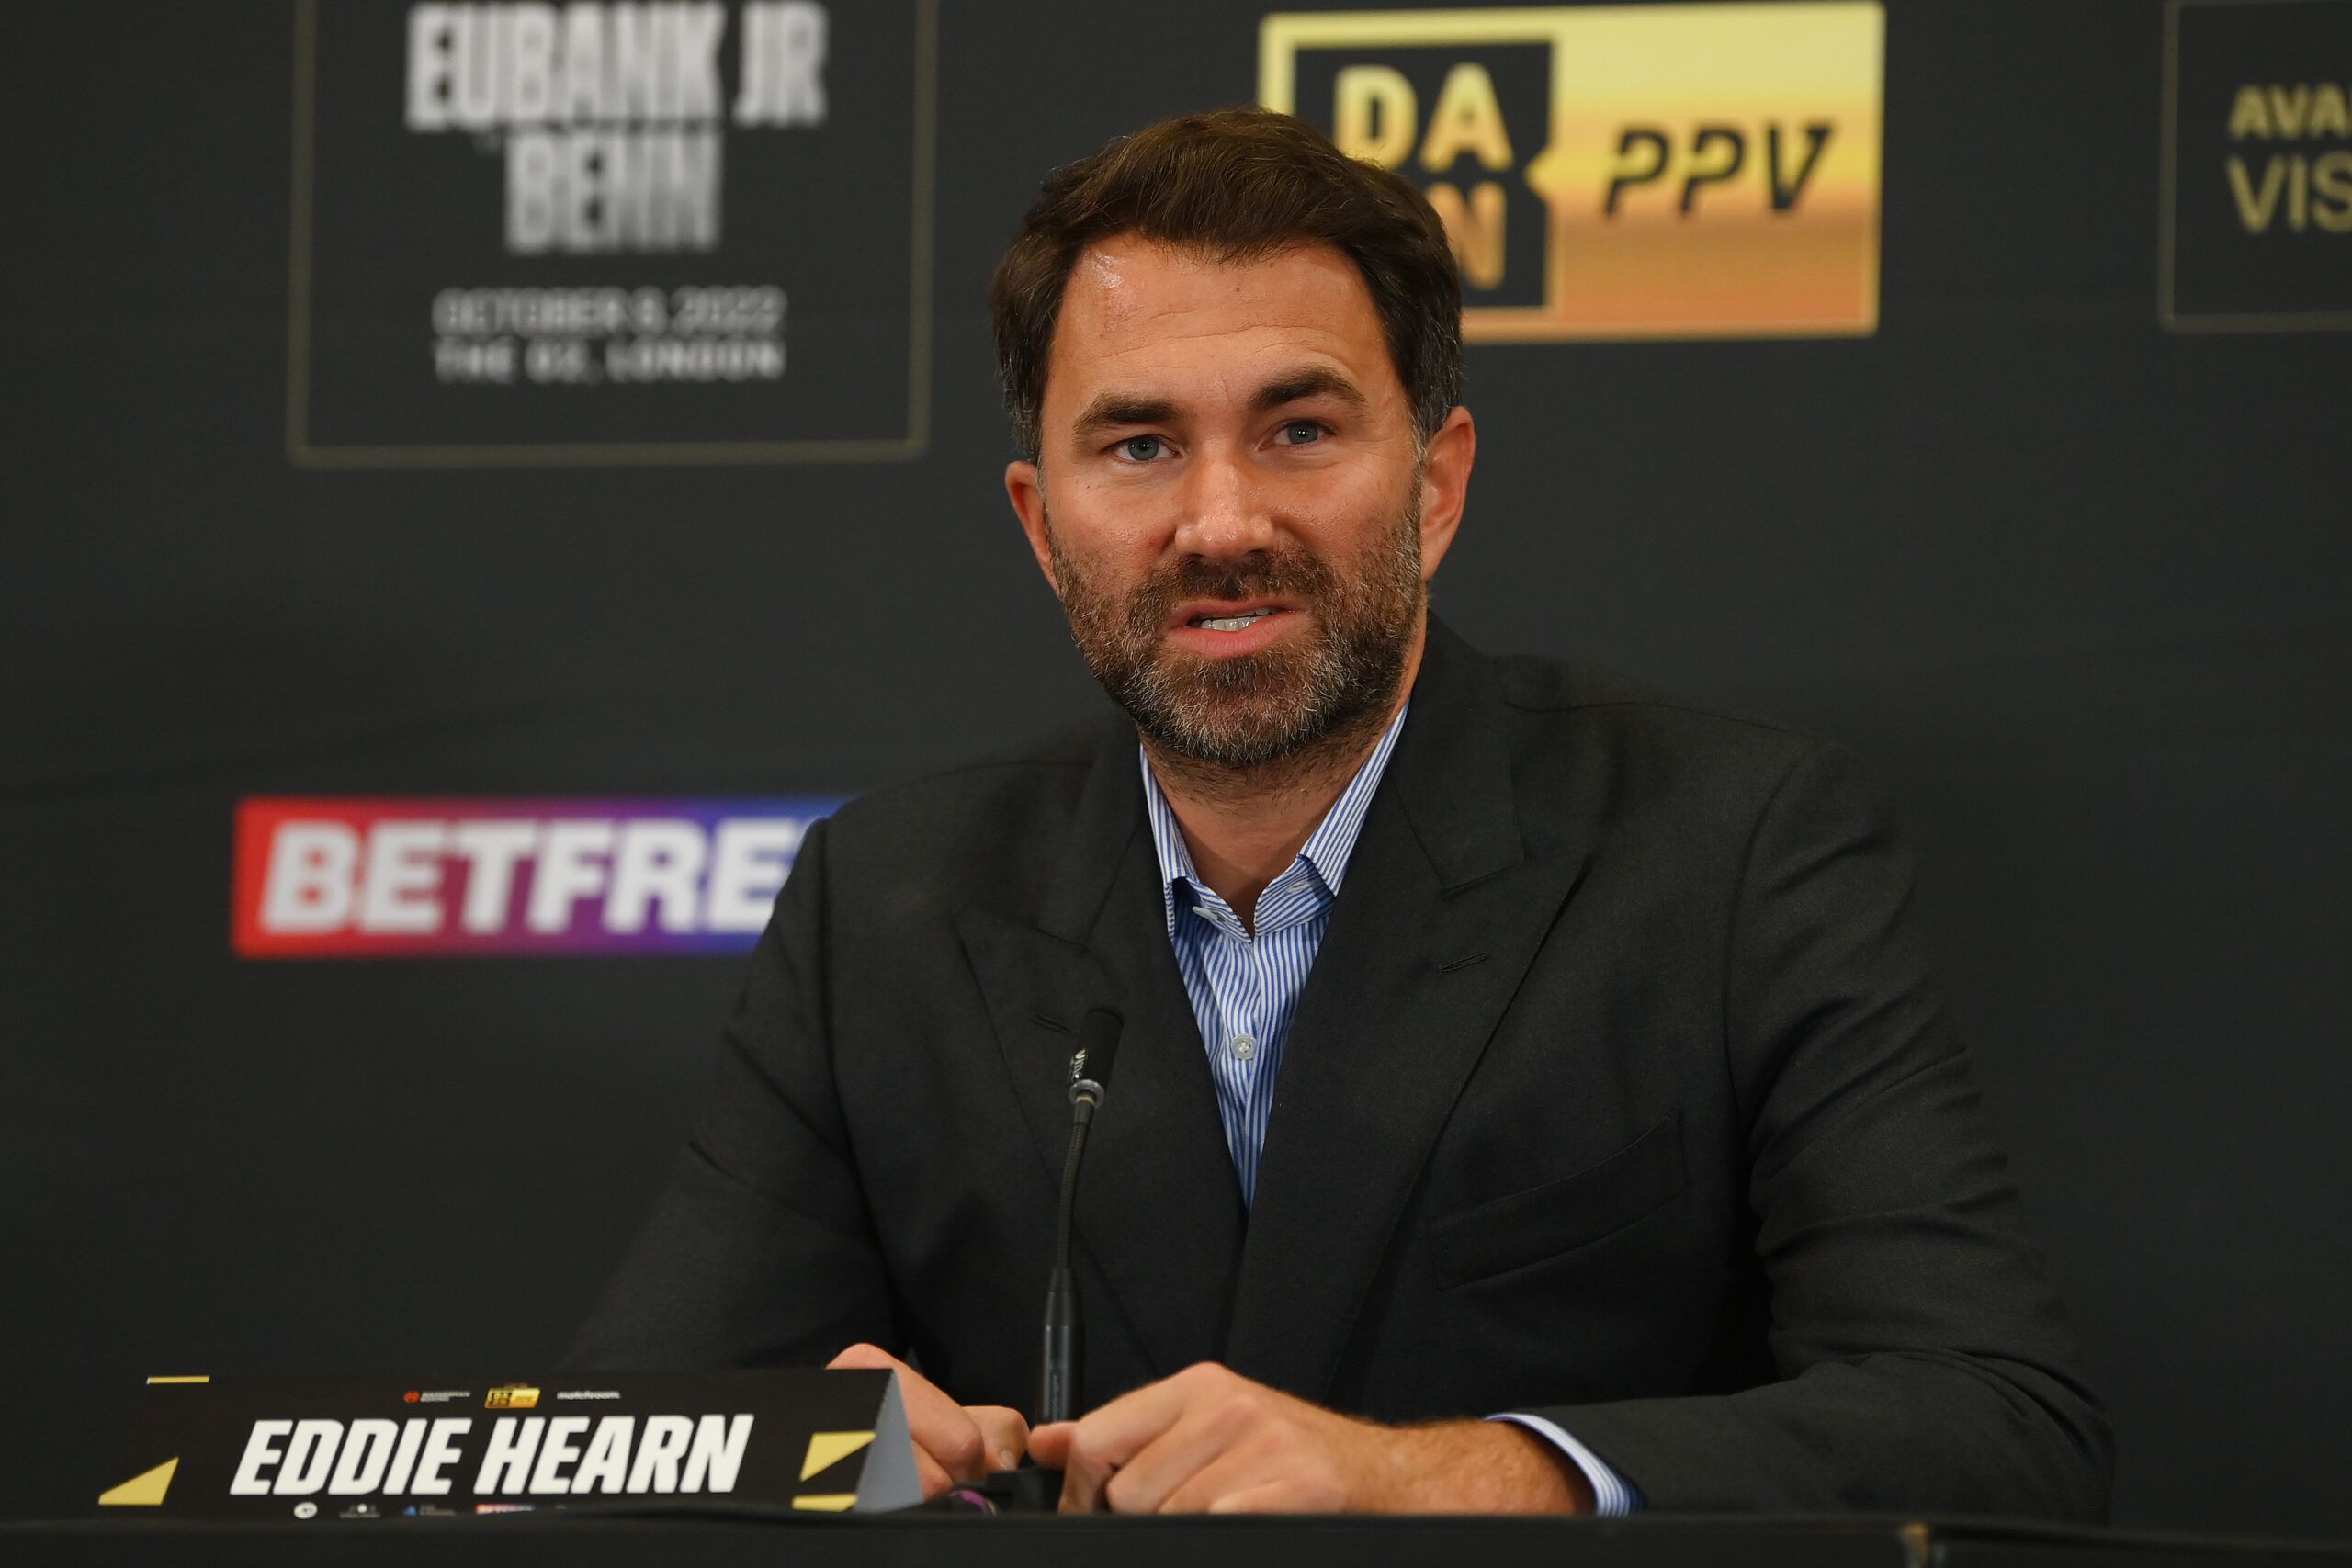 EDDIE HEARN has defended Conor Benn as the fallout over his failed drugs test continues